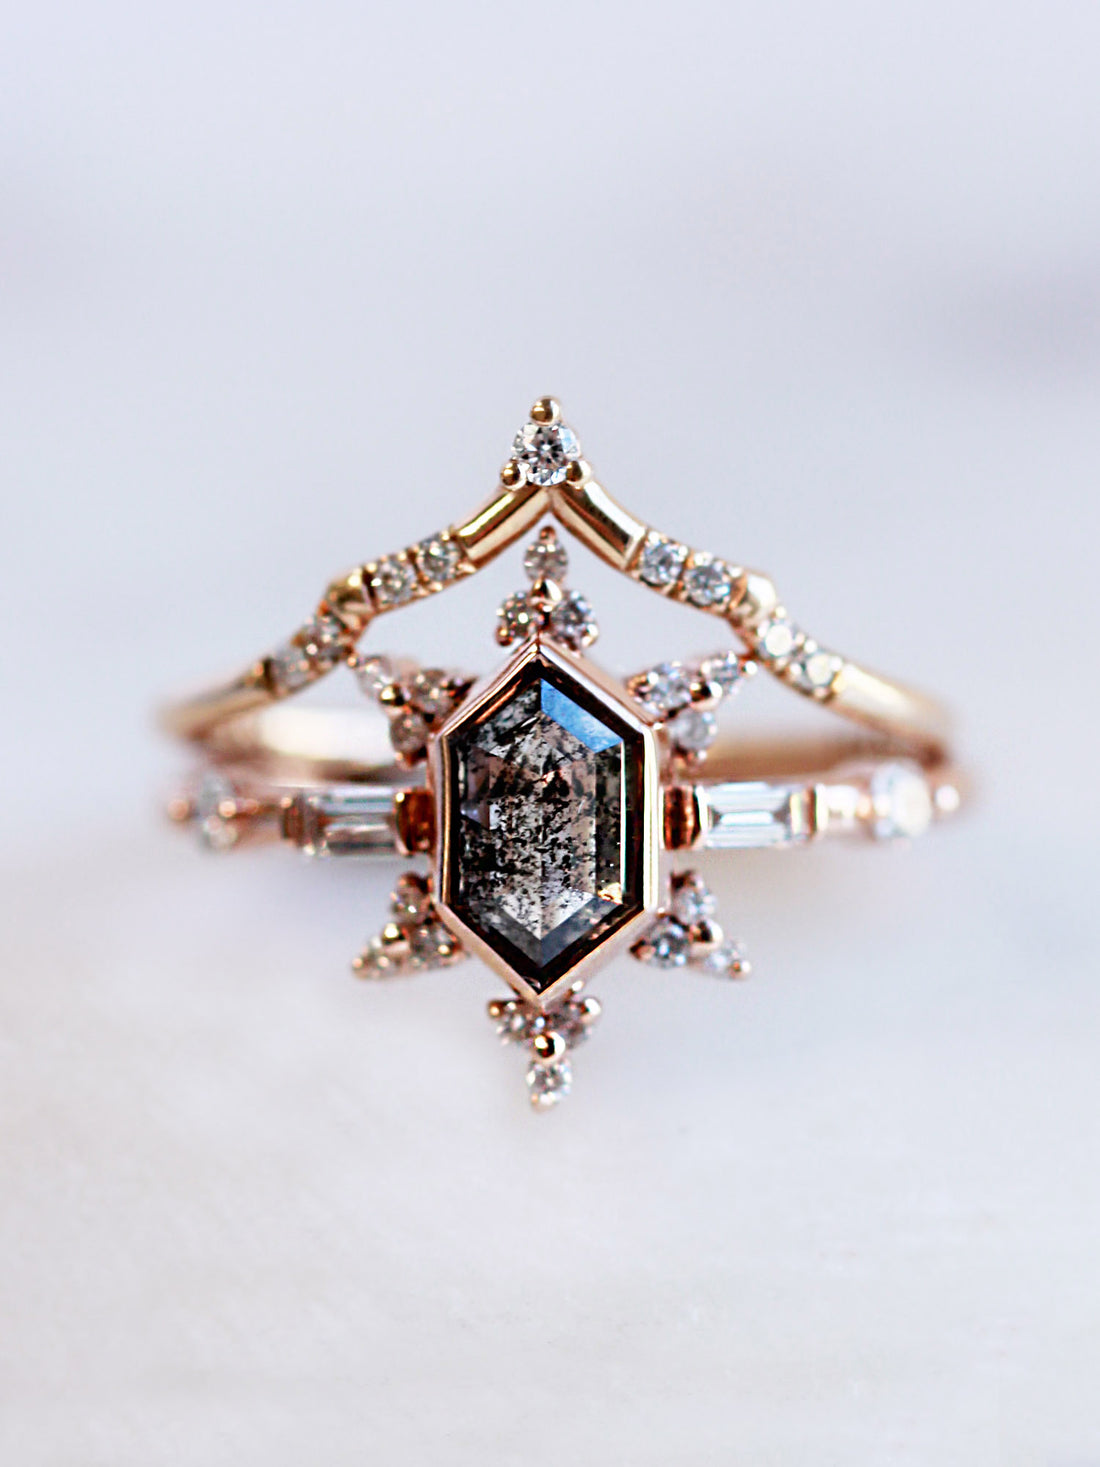 hiddenspace-engagement-rings-queen-of-ice-salt-and-pepper-diamond-14k-front-with-band